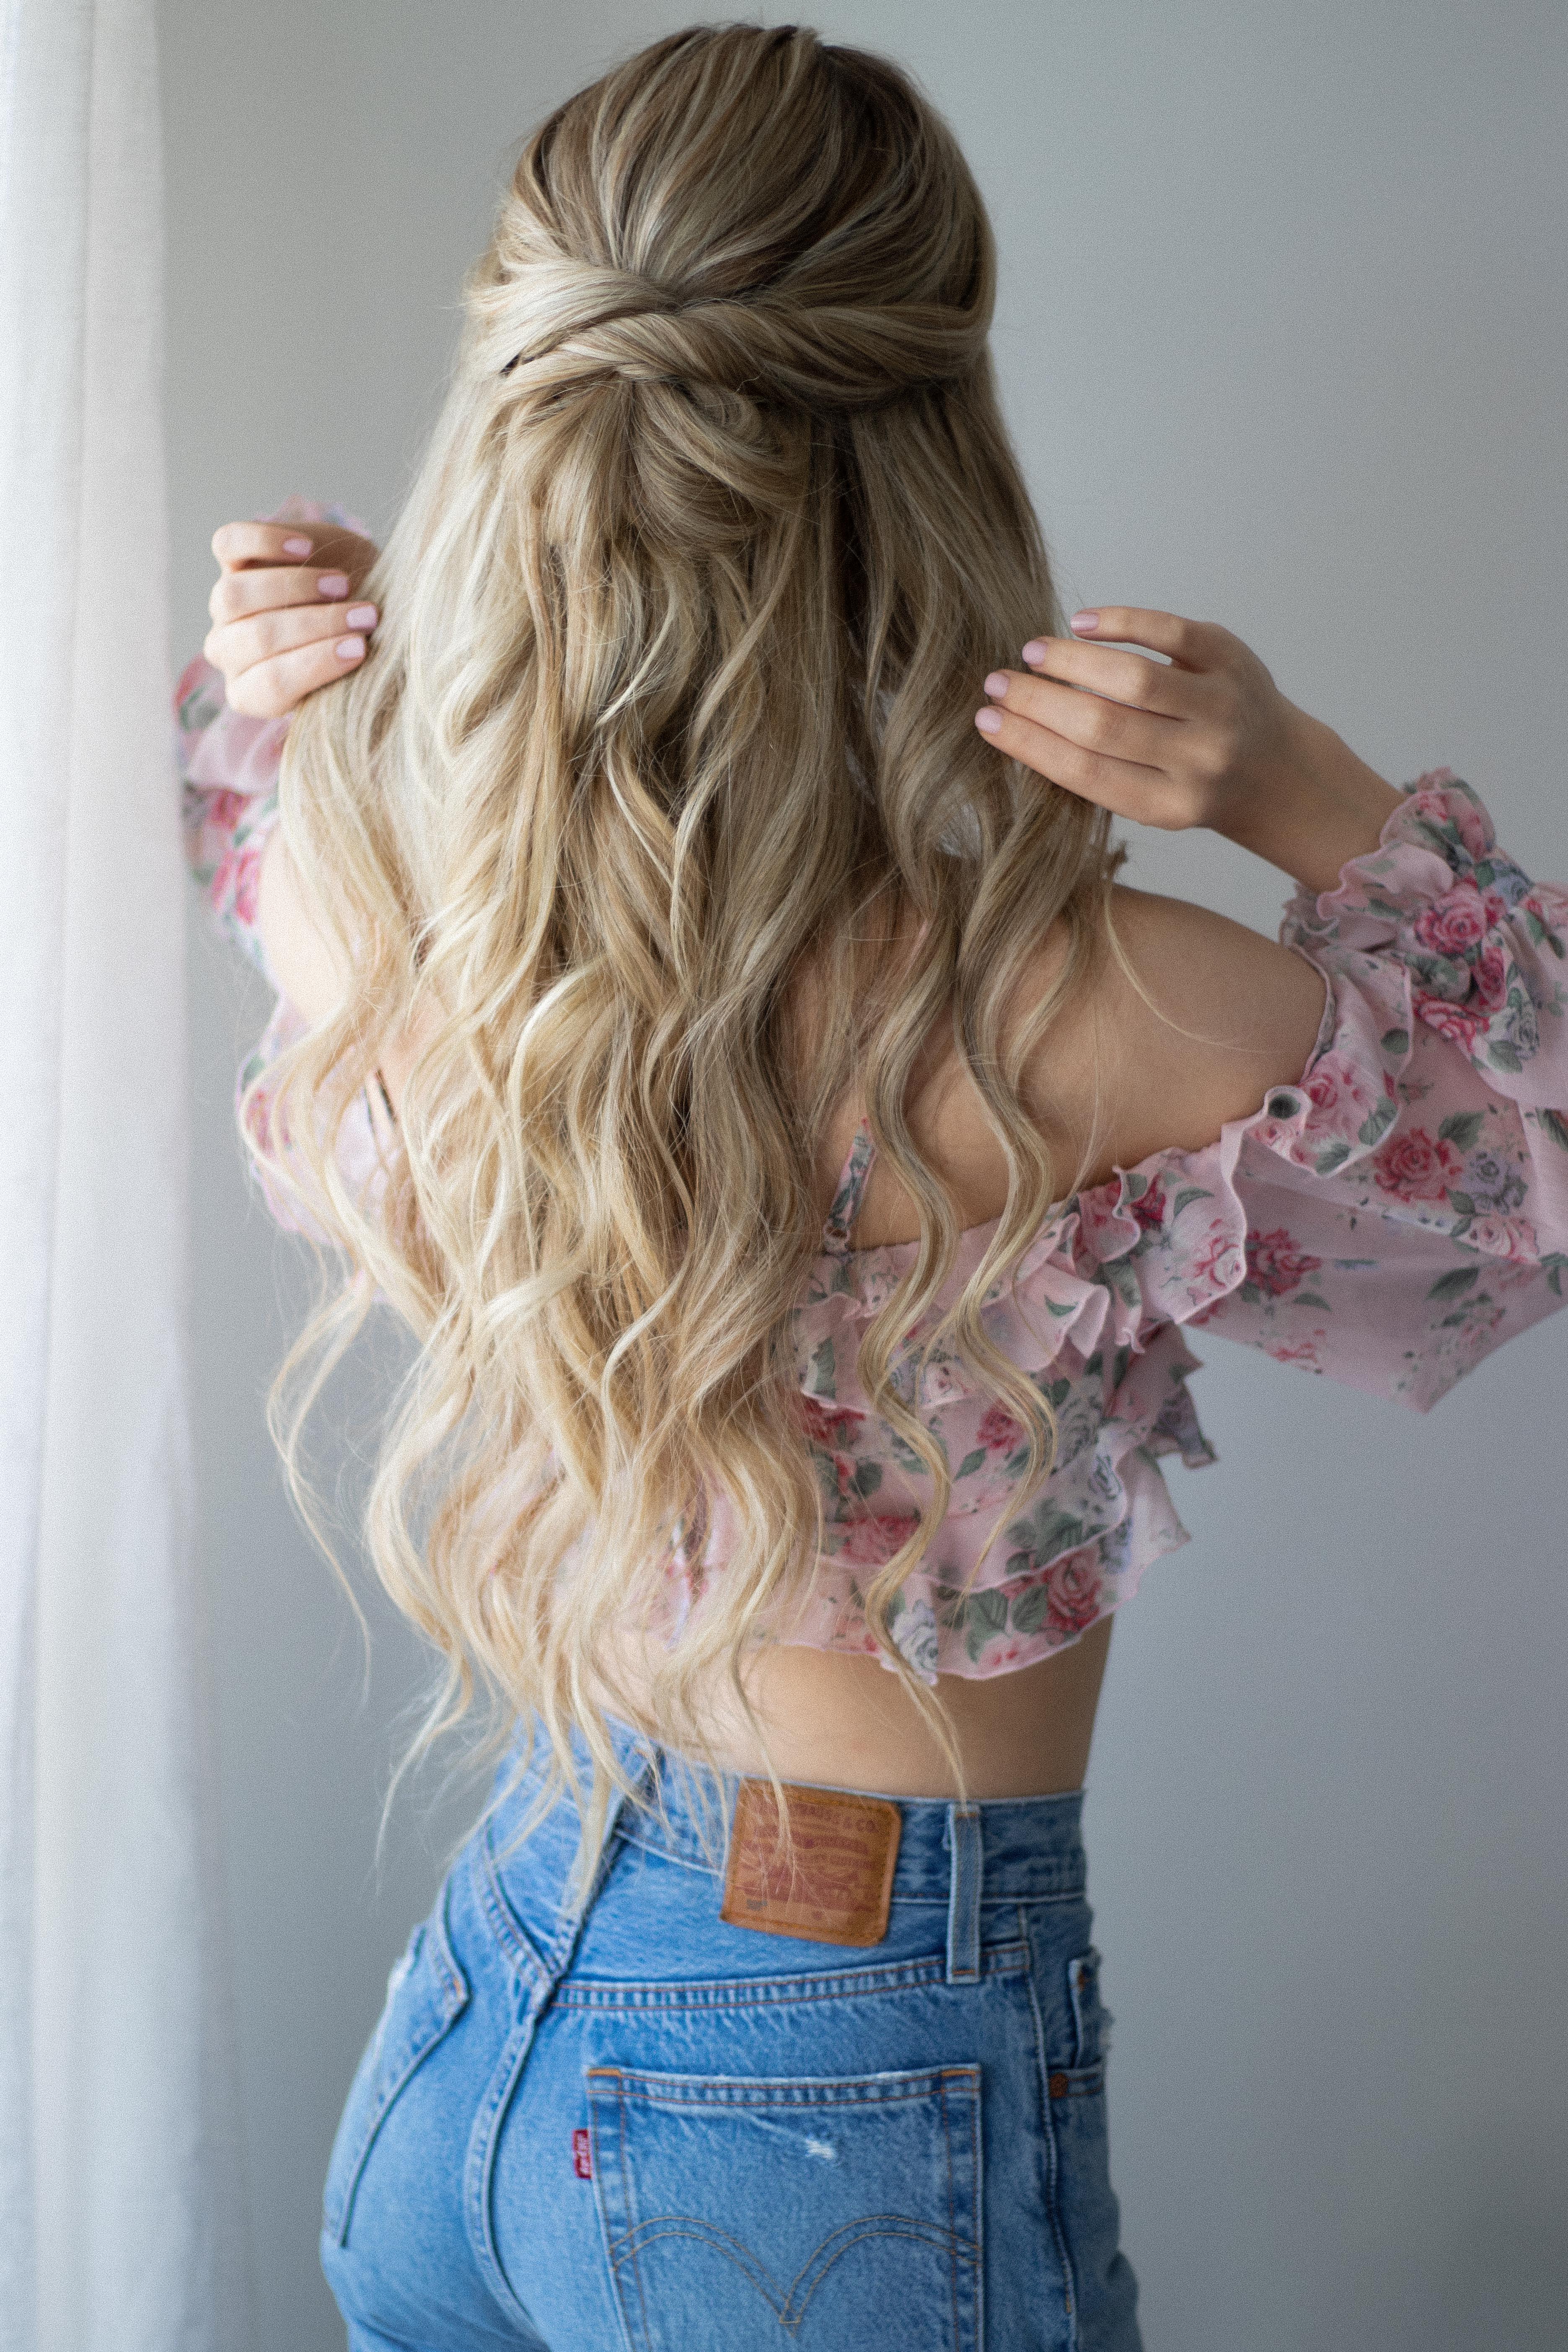 18+ Hairstyles easy and fast ideas